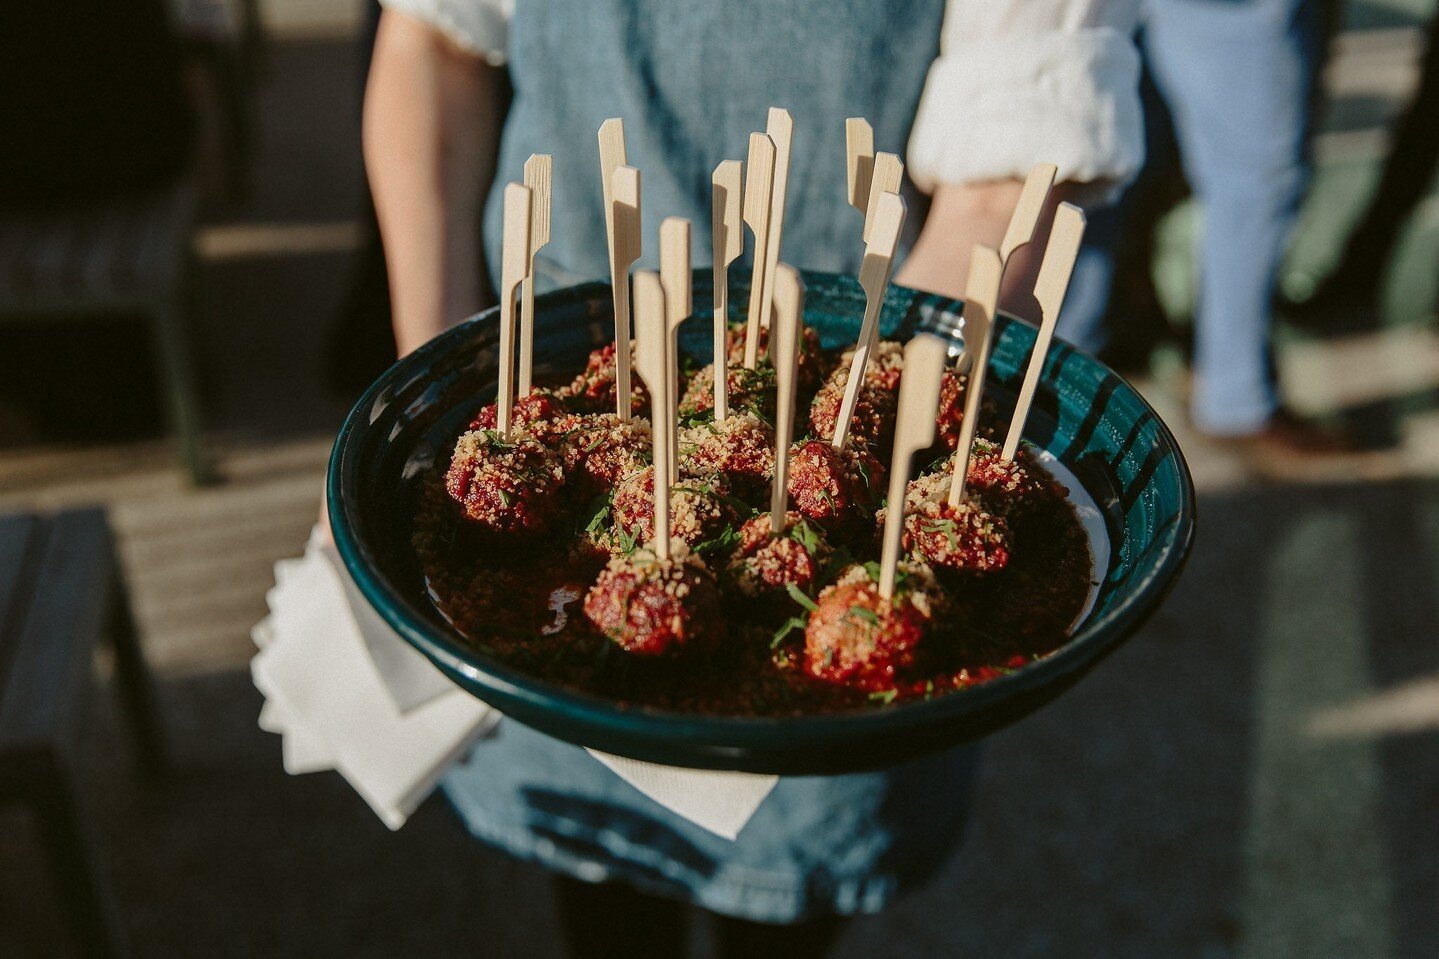 Sit back, relax and let us come to you - canap&eacute;s on arrival served roving for your guests 🥂⁠
⁠
+ Our wedding menu for the upcoming season has just been published. Contact us for more information 🤍⁠
⁠
Photographer:  @hellojessnicholls⁠
Food: 